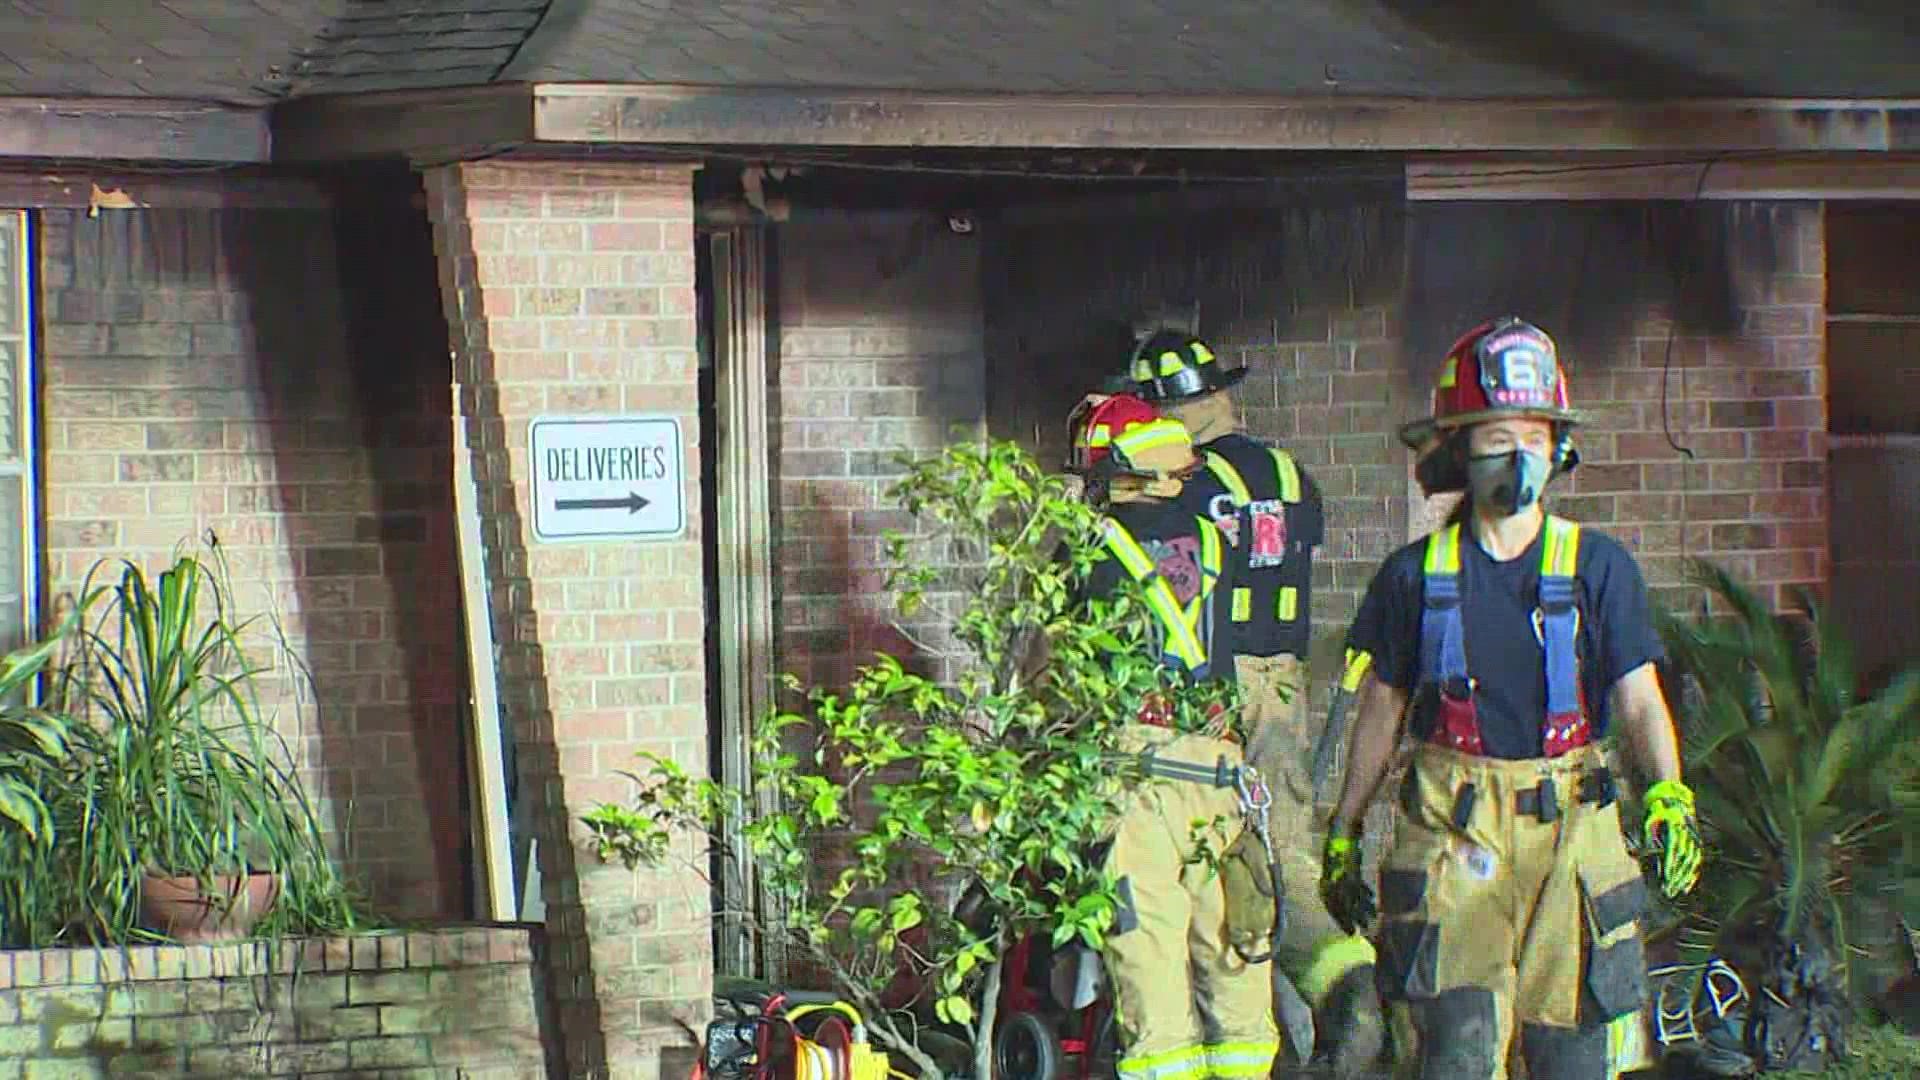 An 83-year-old was found dead in a house fire in northwest Harris County early Friday morning, according to the Harris County Fire Marshal’s Office.